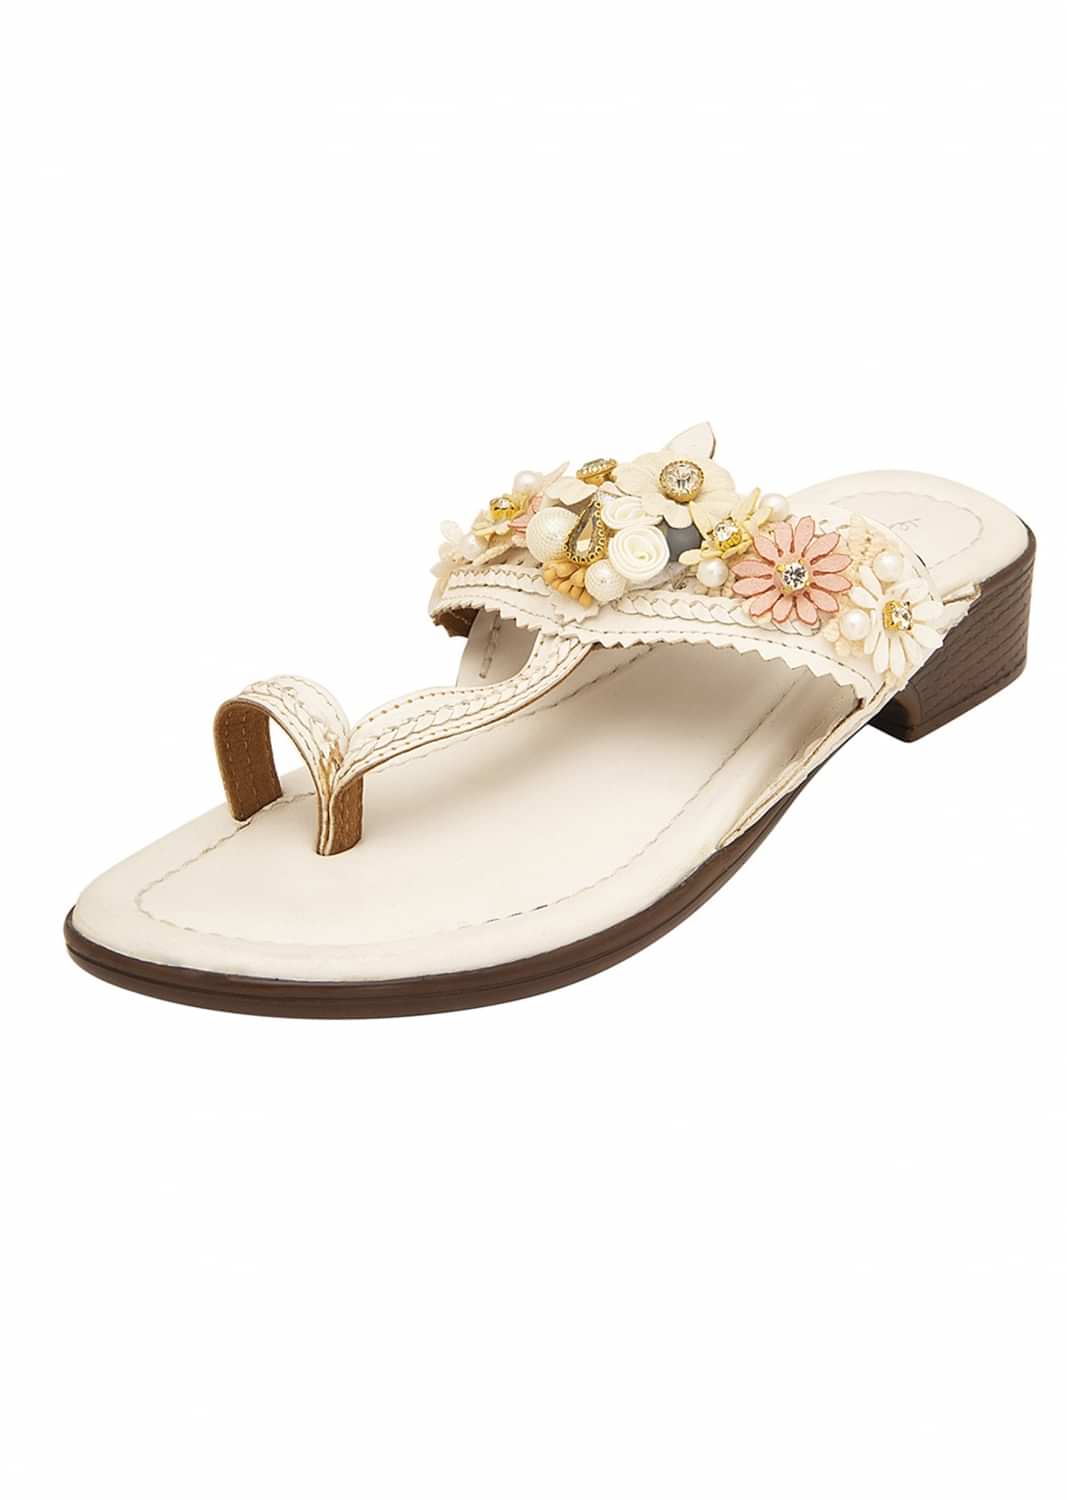 Off White Kolhapuri Cushioned Flat Footwear With Floral Embellishment